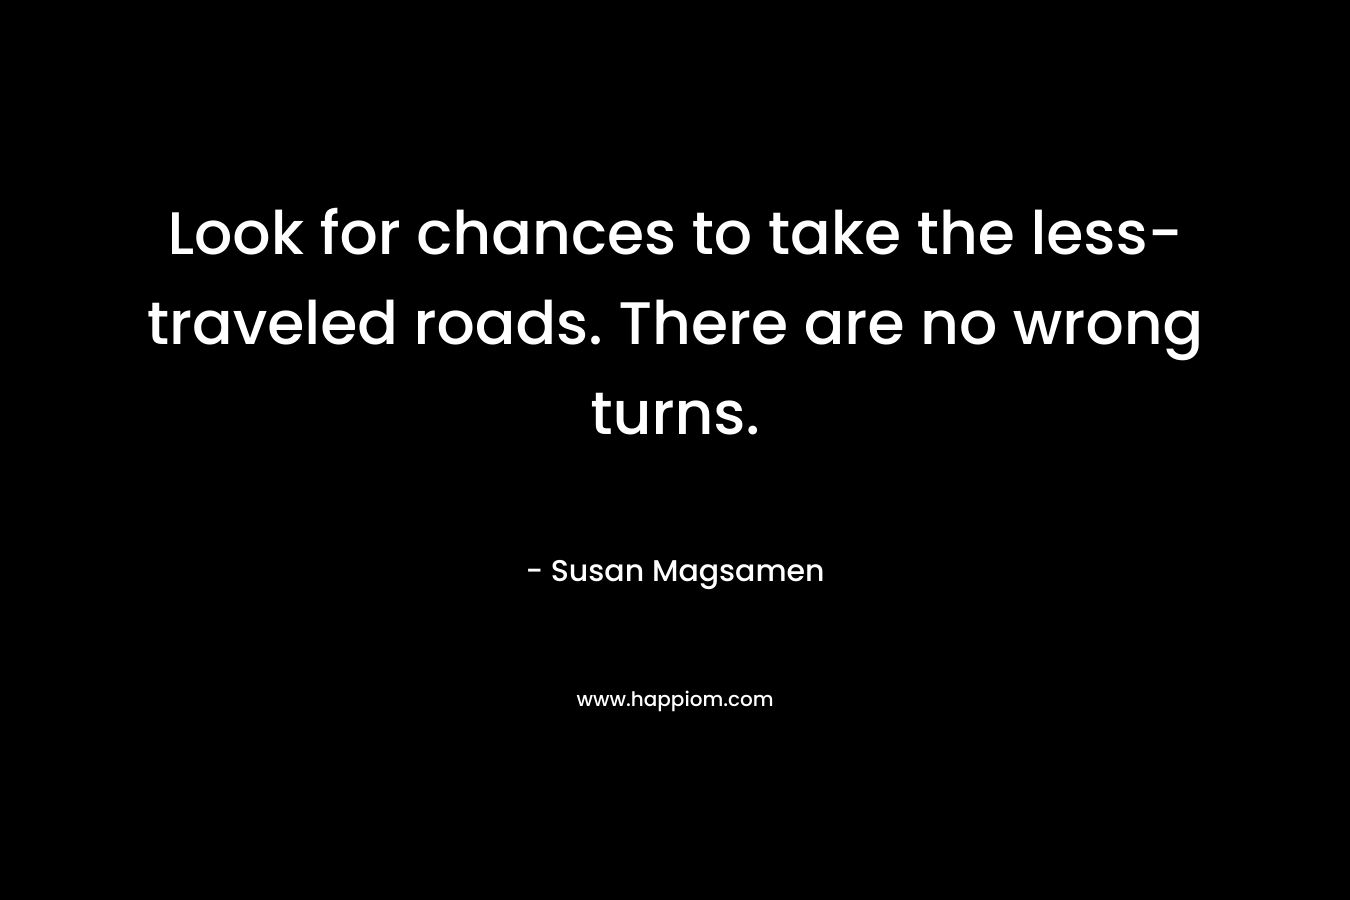 Look for chances to take the less-traveled roads. There are no wrong turns. – Susan Magsamen